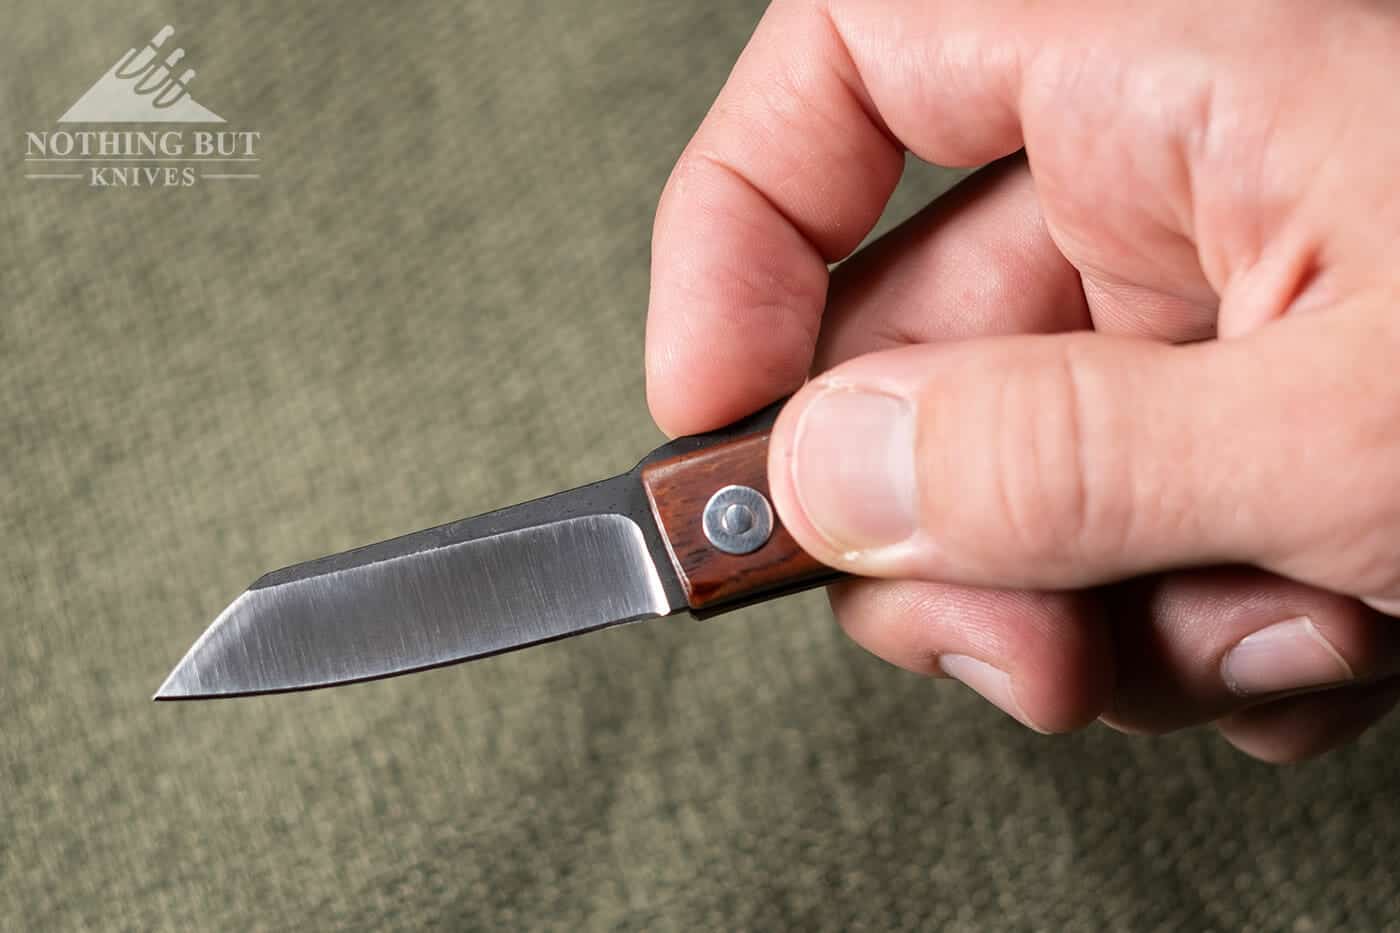 The ergos aren’t great, but they’re not terrible. There’s only so much you can say about a knife this small and this simple.